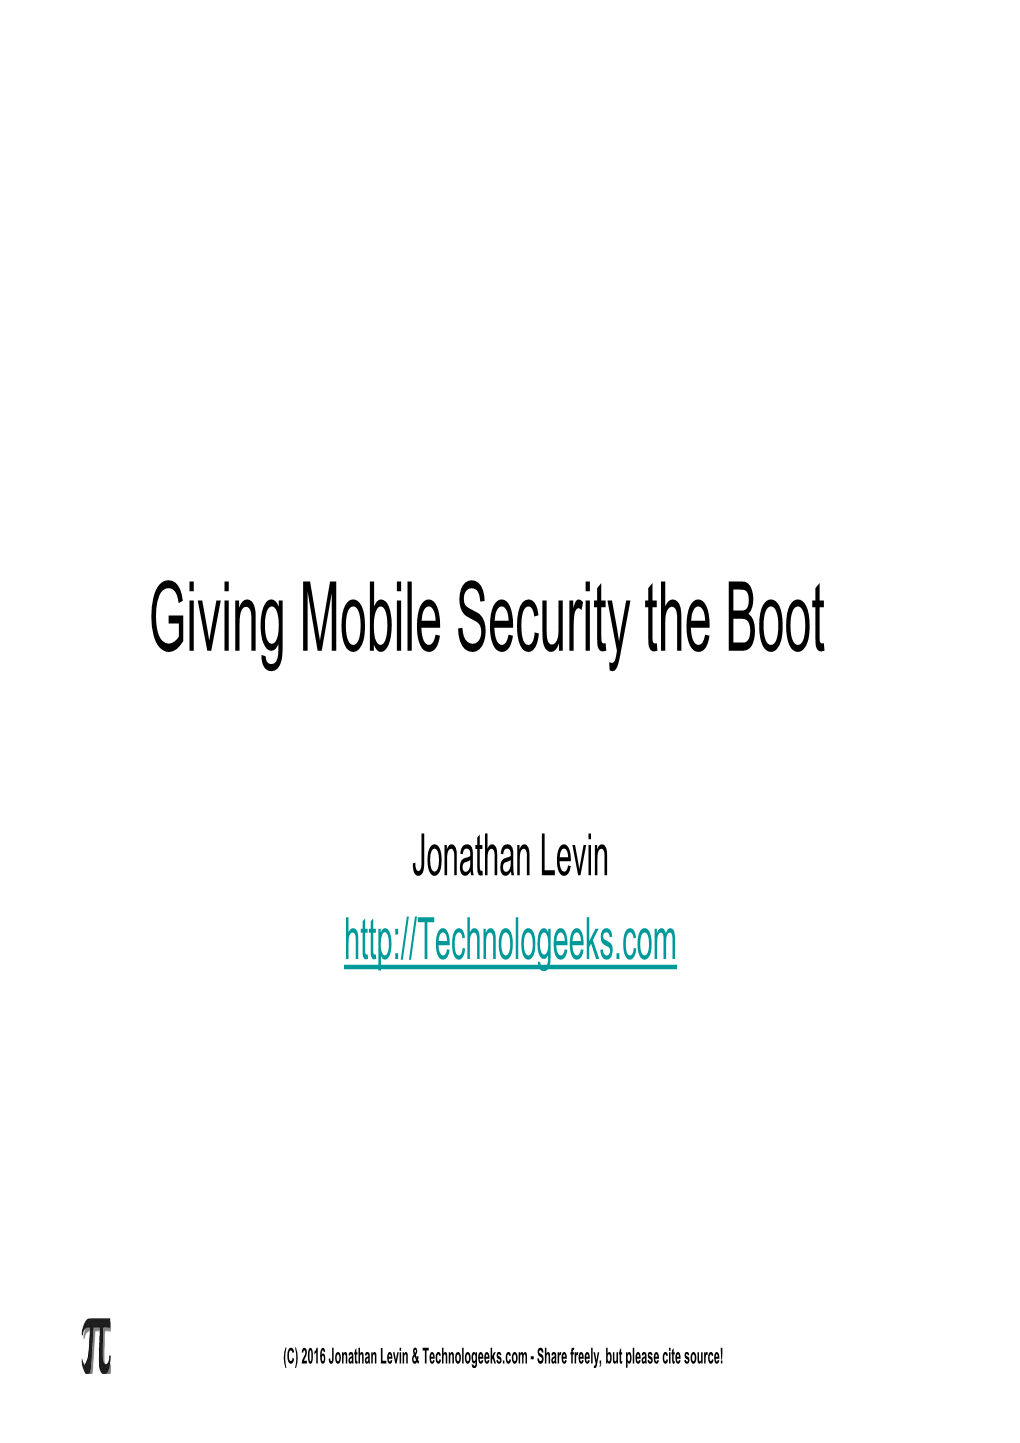 Giving Mobile Security the Boot